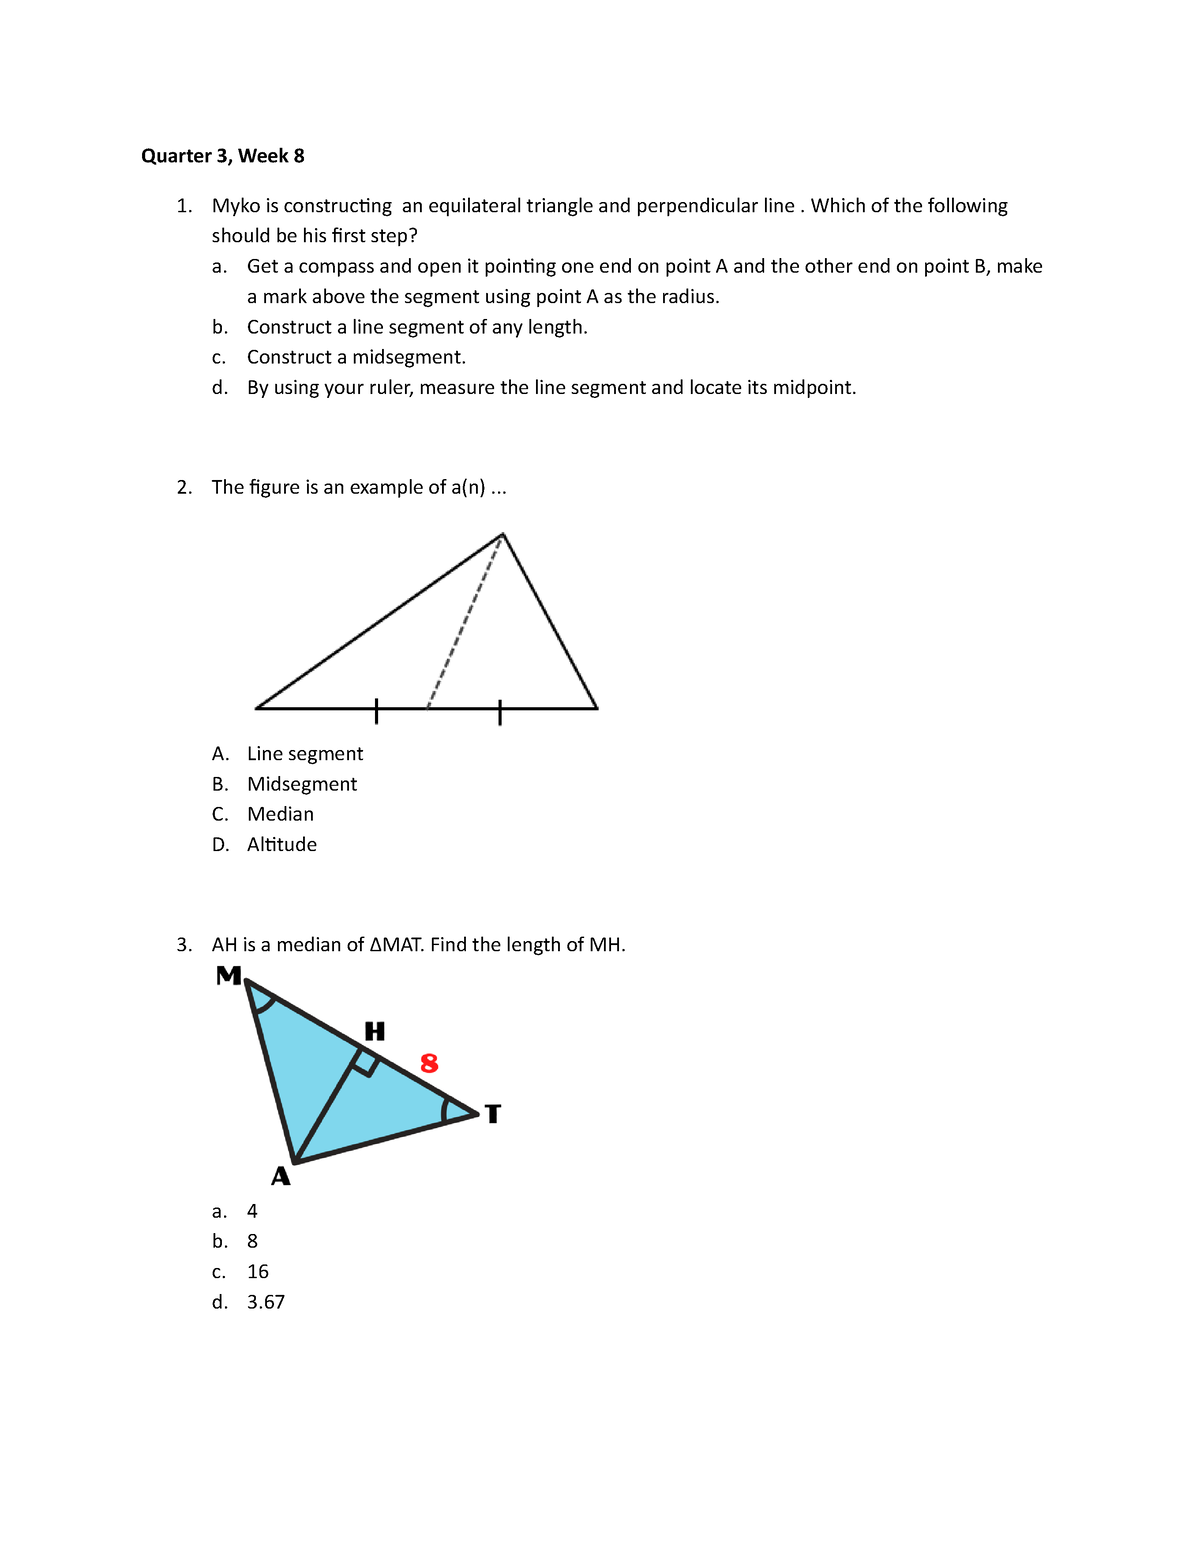 applies triangle congruence to construct perpendicular lines and angle bisectors